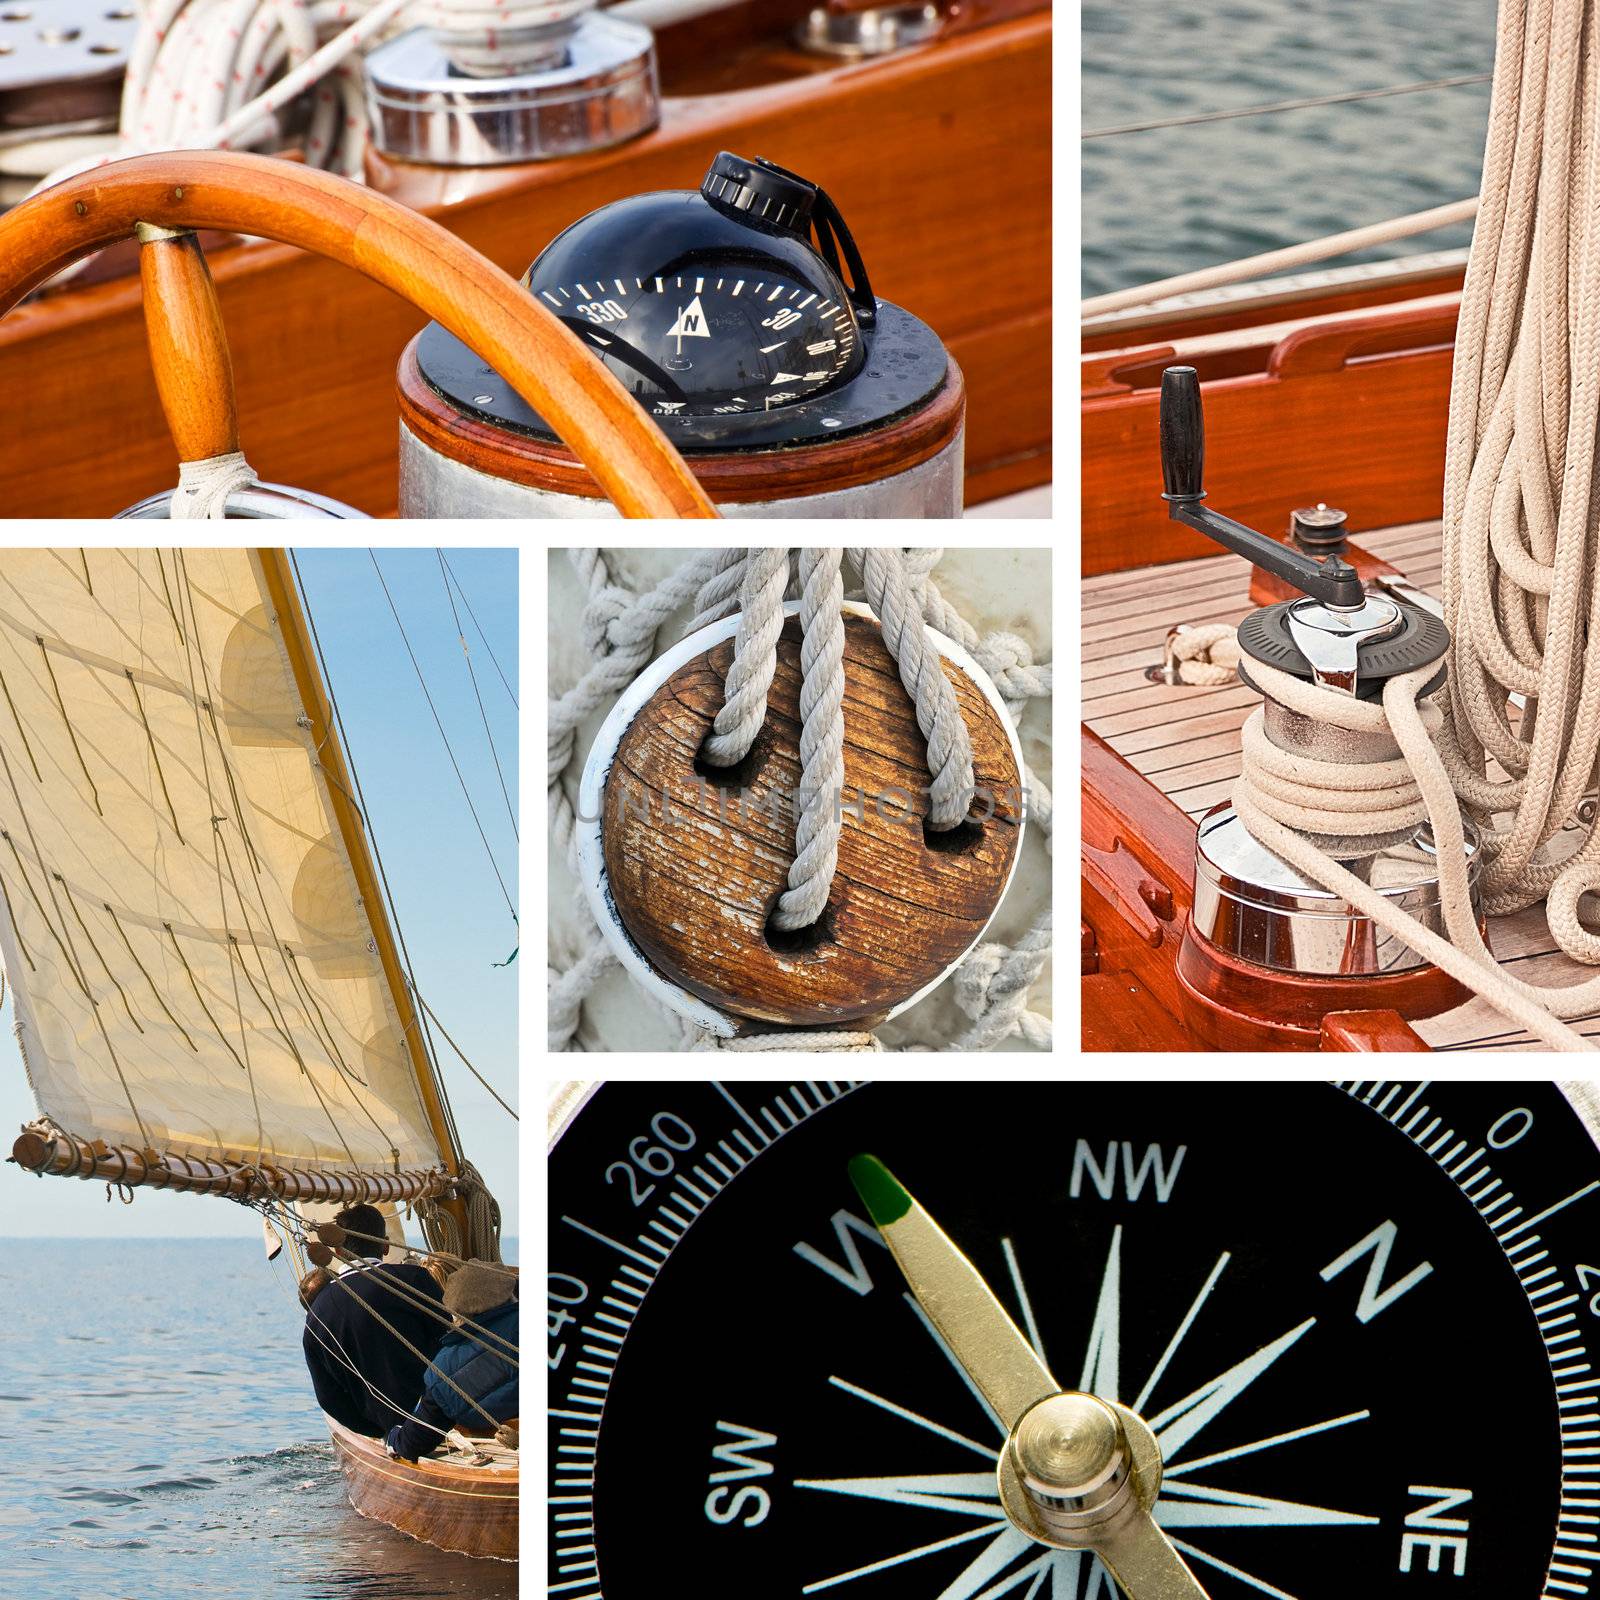 Sailboat and yacht collage by lebanmax